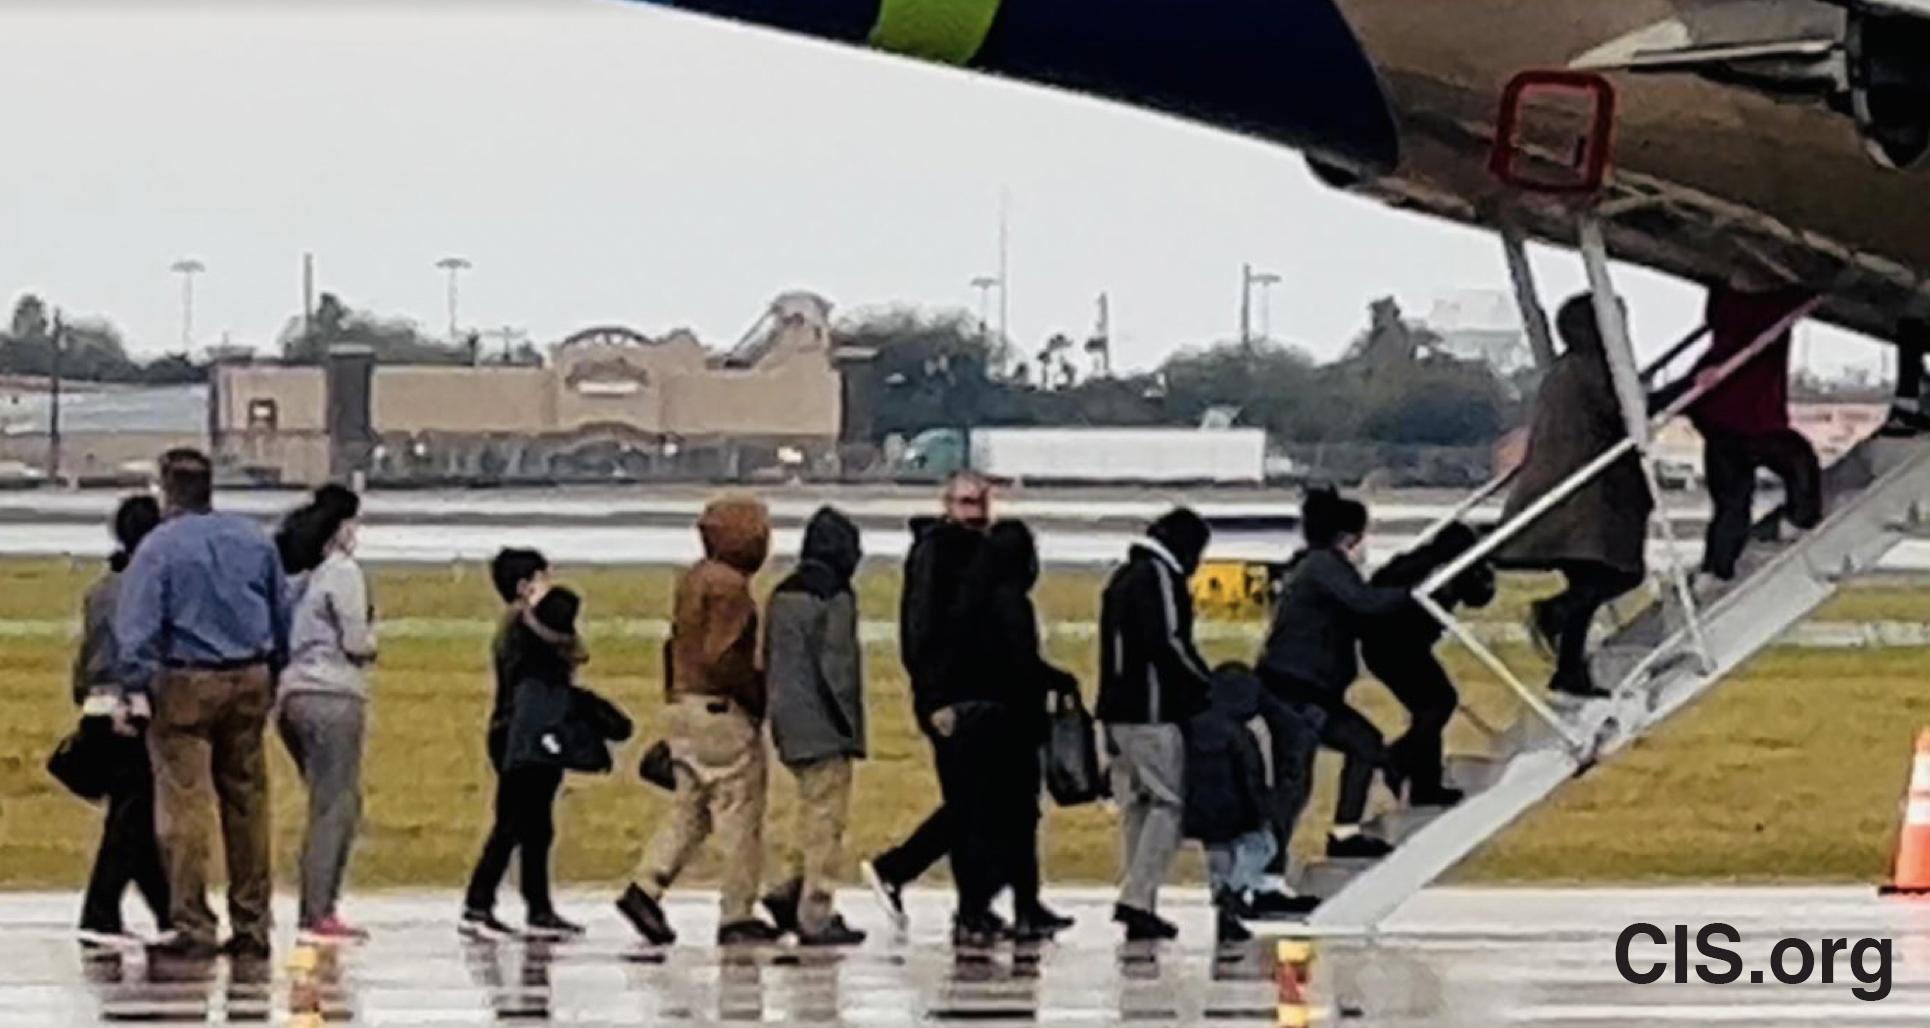  Central American women and children migrants in McAllen Texas board a deportation flight to Guatemala City